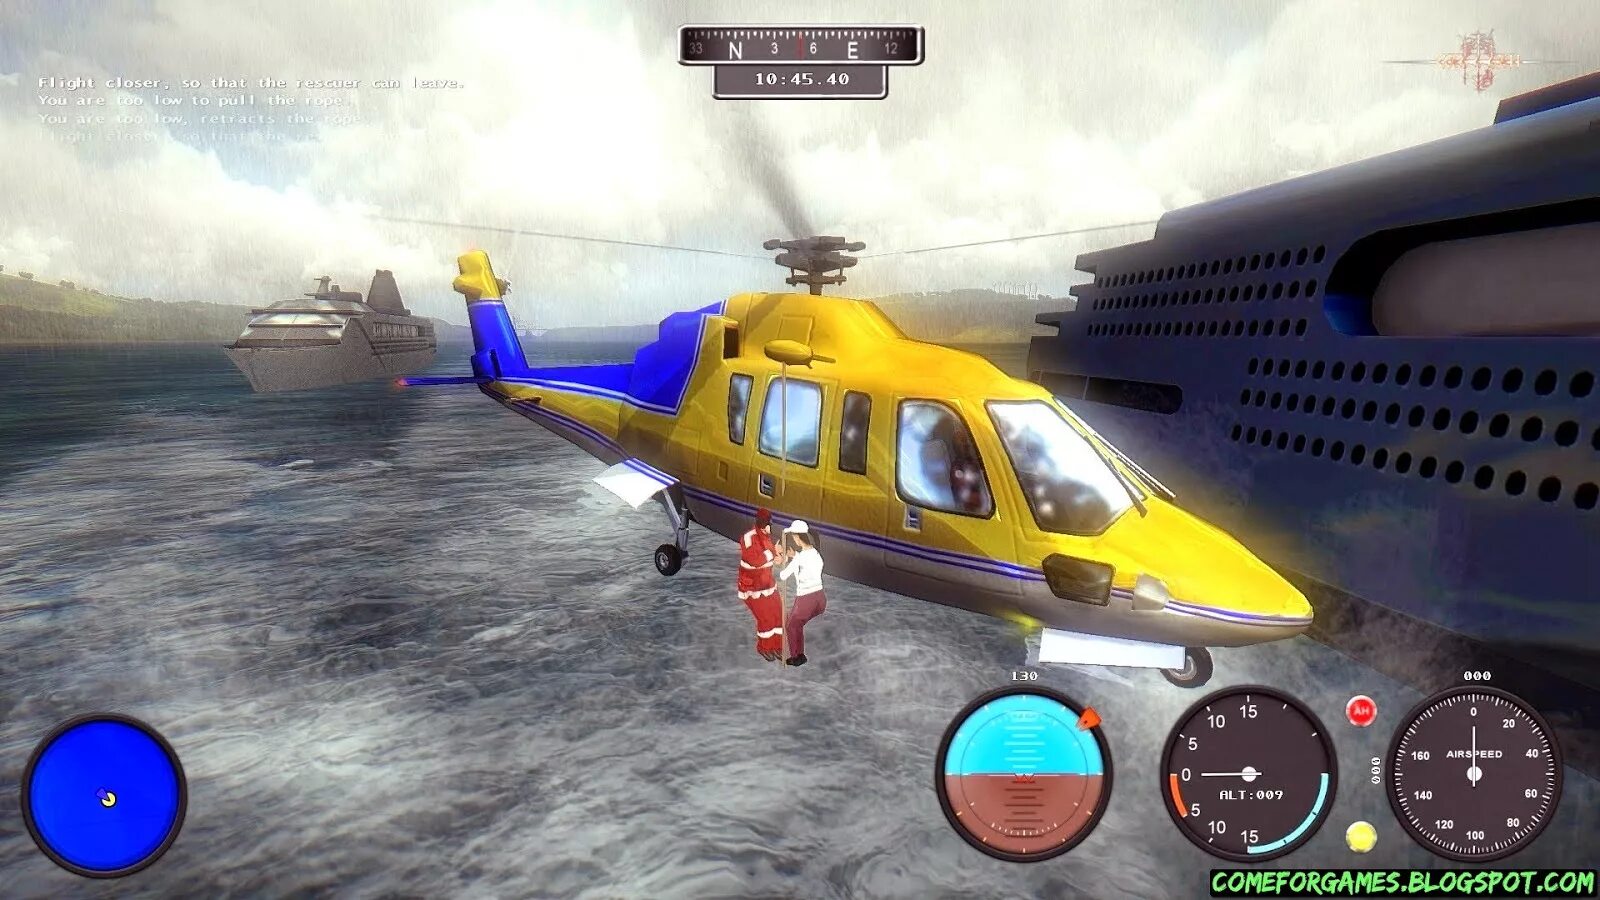 Helicopter игра. Вертолет симулятор с4. Игра Helicopter 1998. Симулятор search and Rescue.